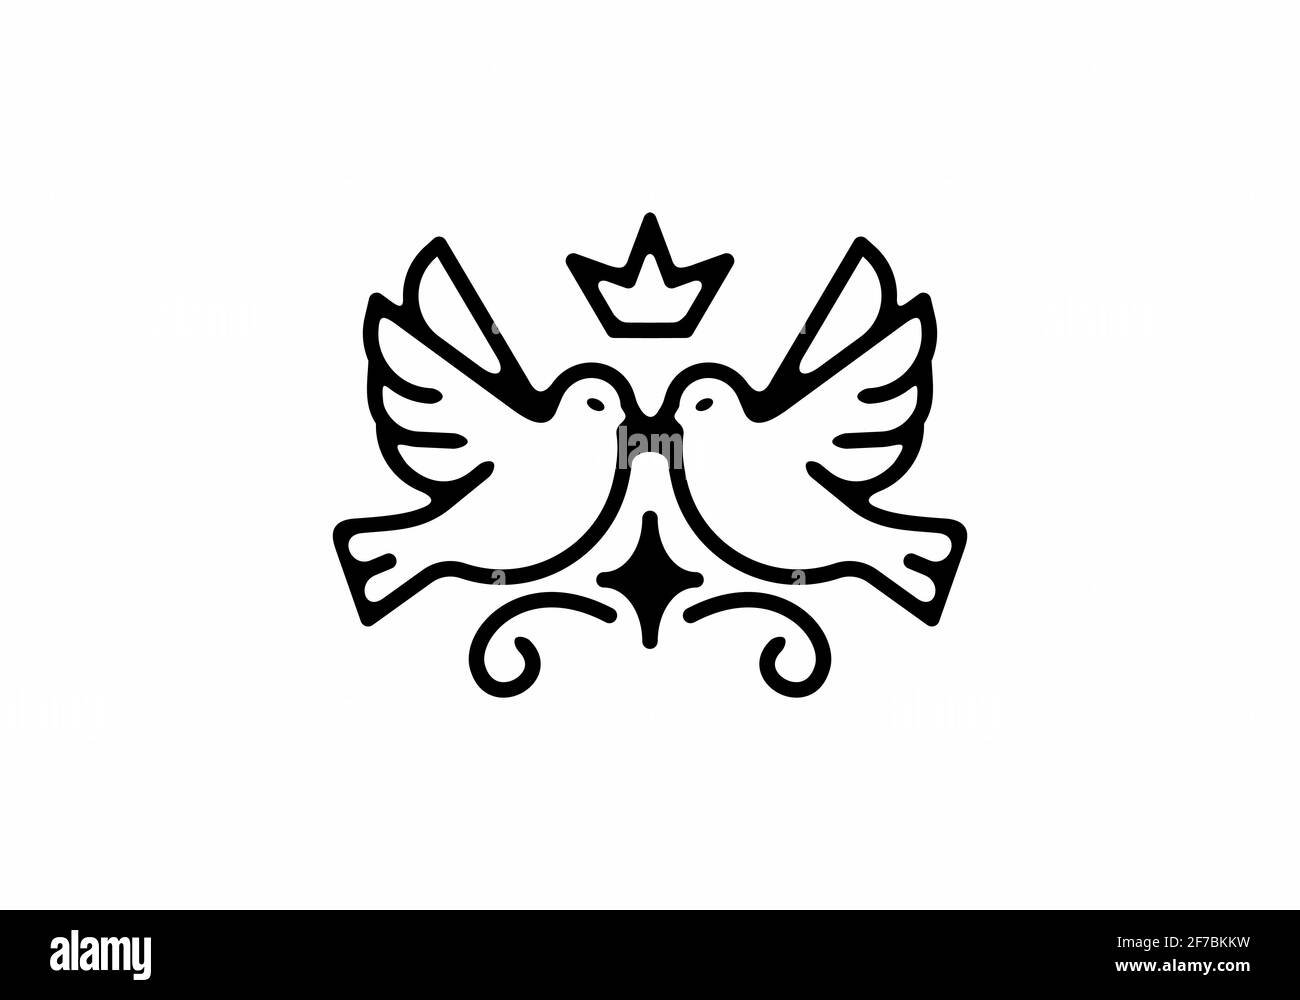 Twin dove with crown line art illustration tattoo design Stock Vector